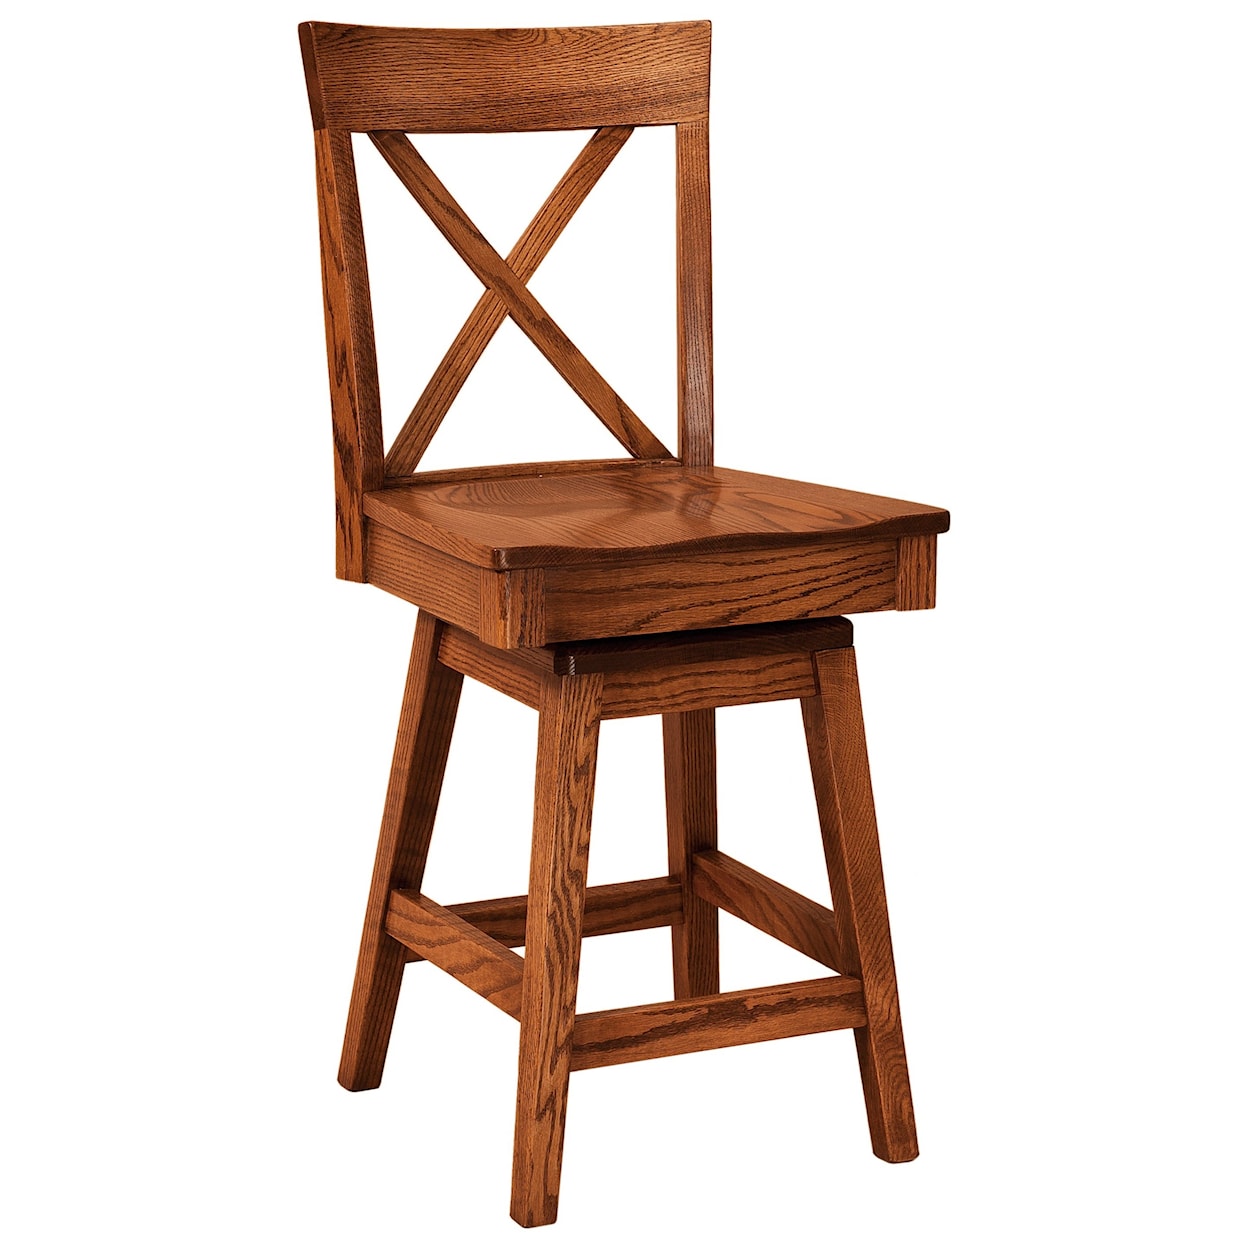 F&N Woodworking Frontier Swivel Bar Stool - Leather Seat